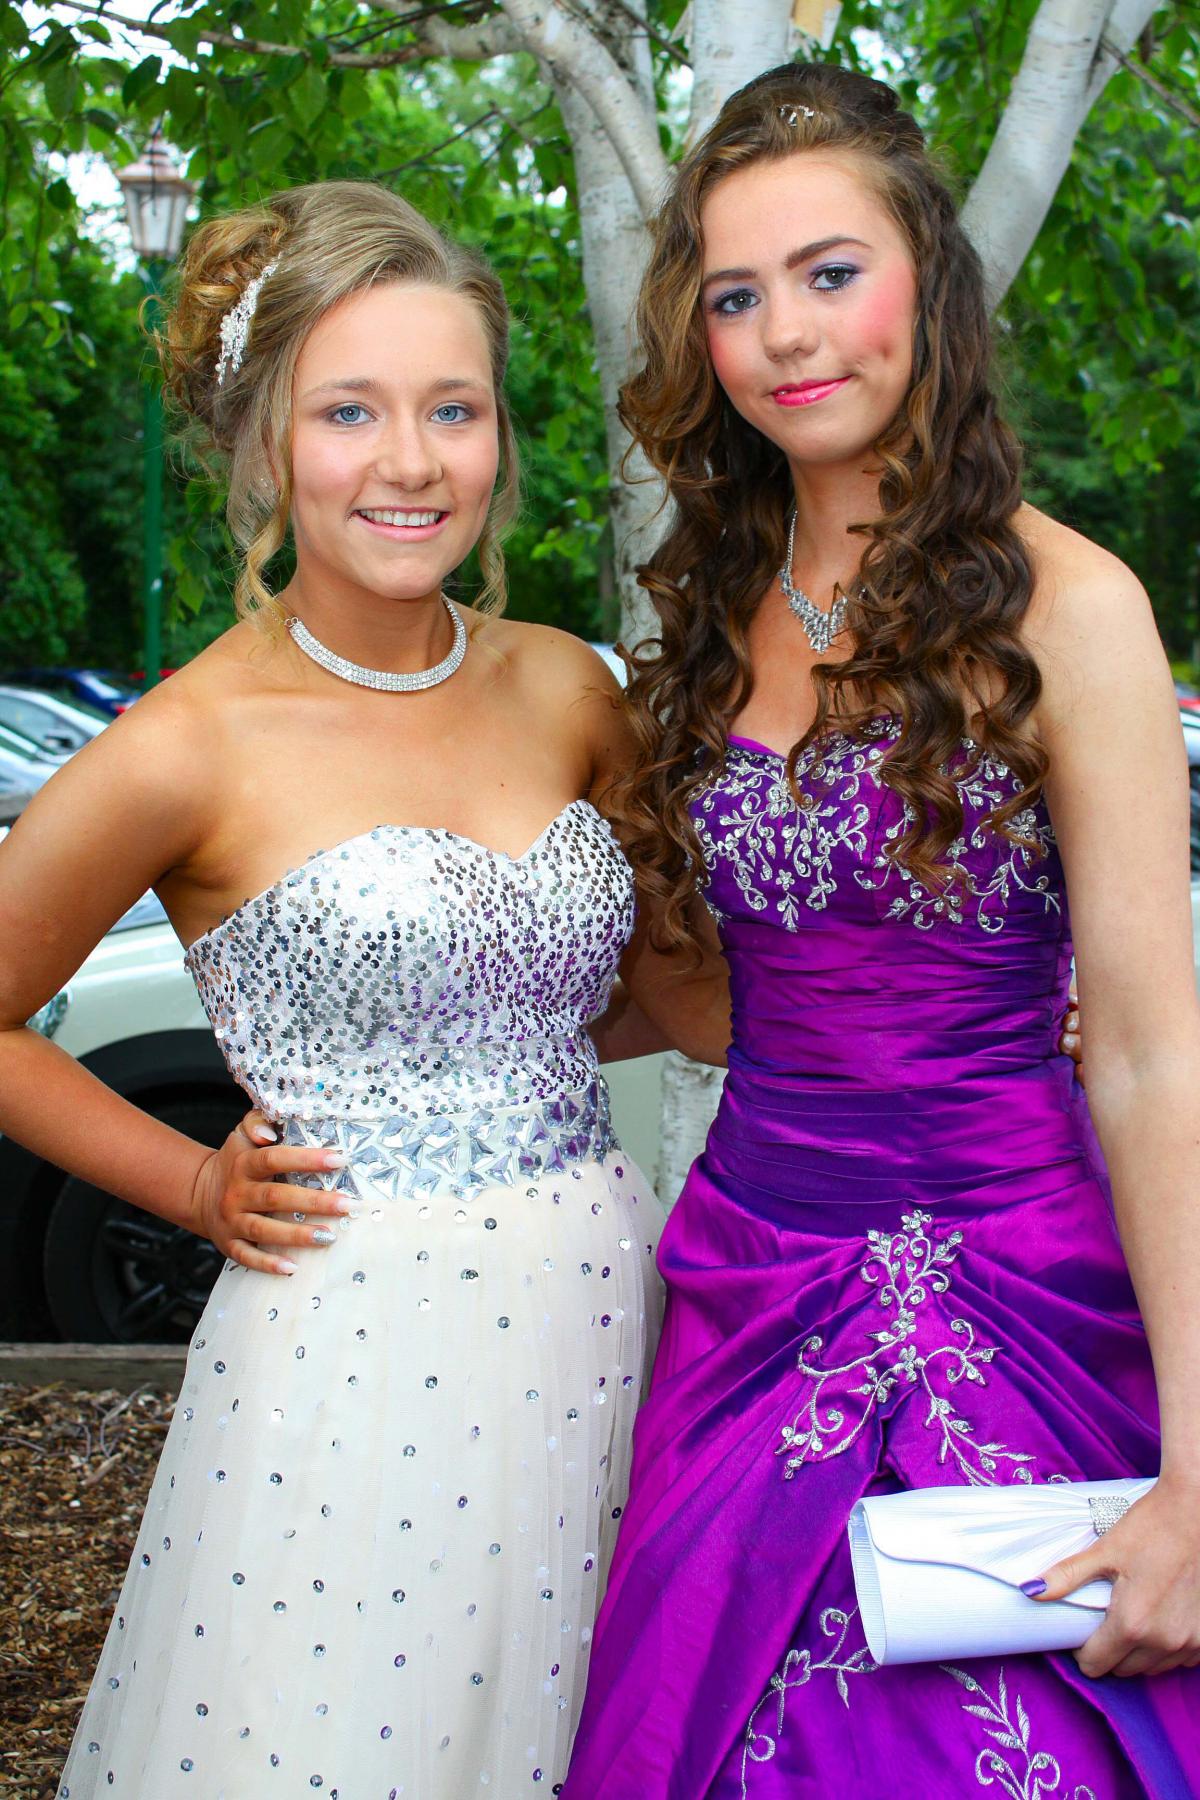 Caitlin Sear, 16 and Shannon Anderson, 16